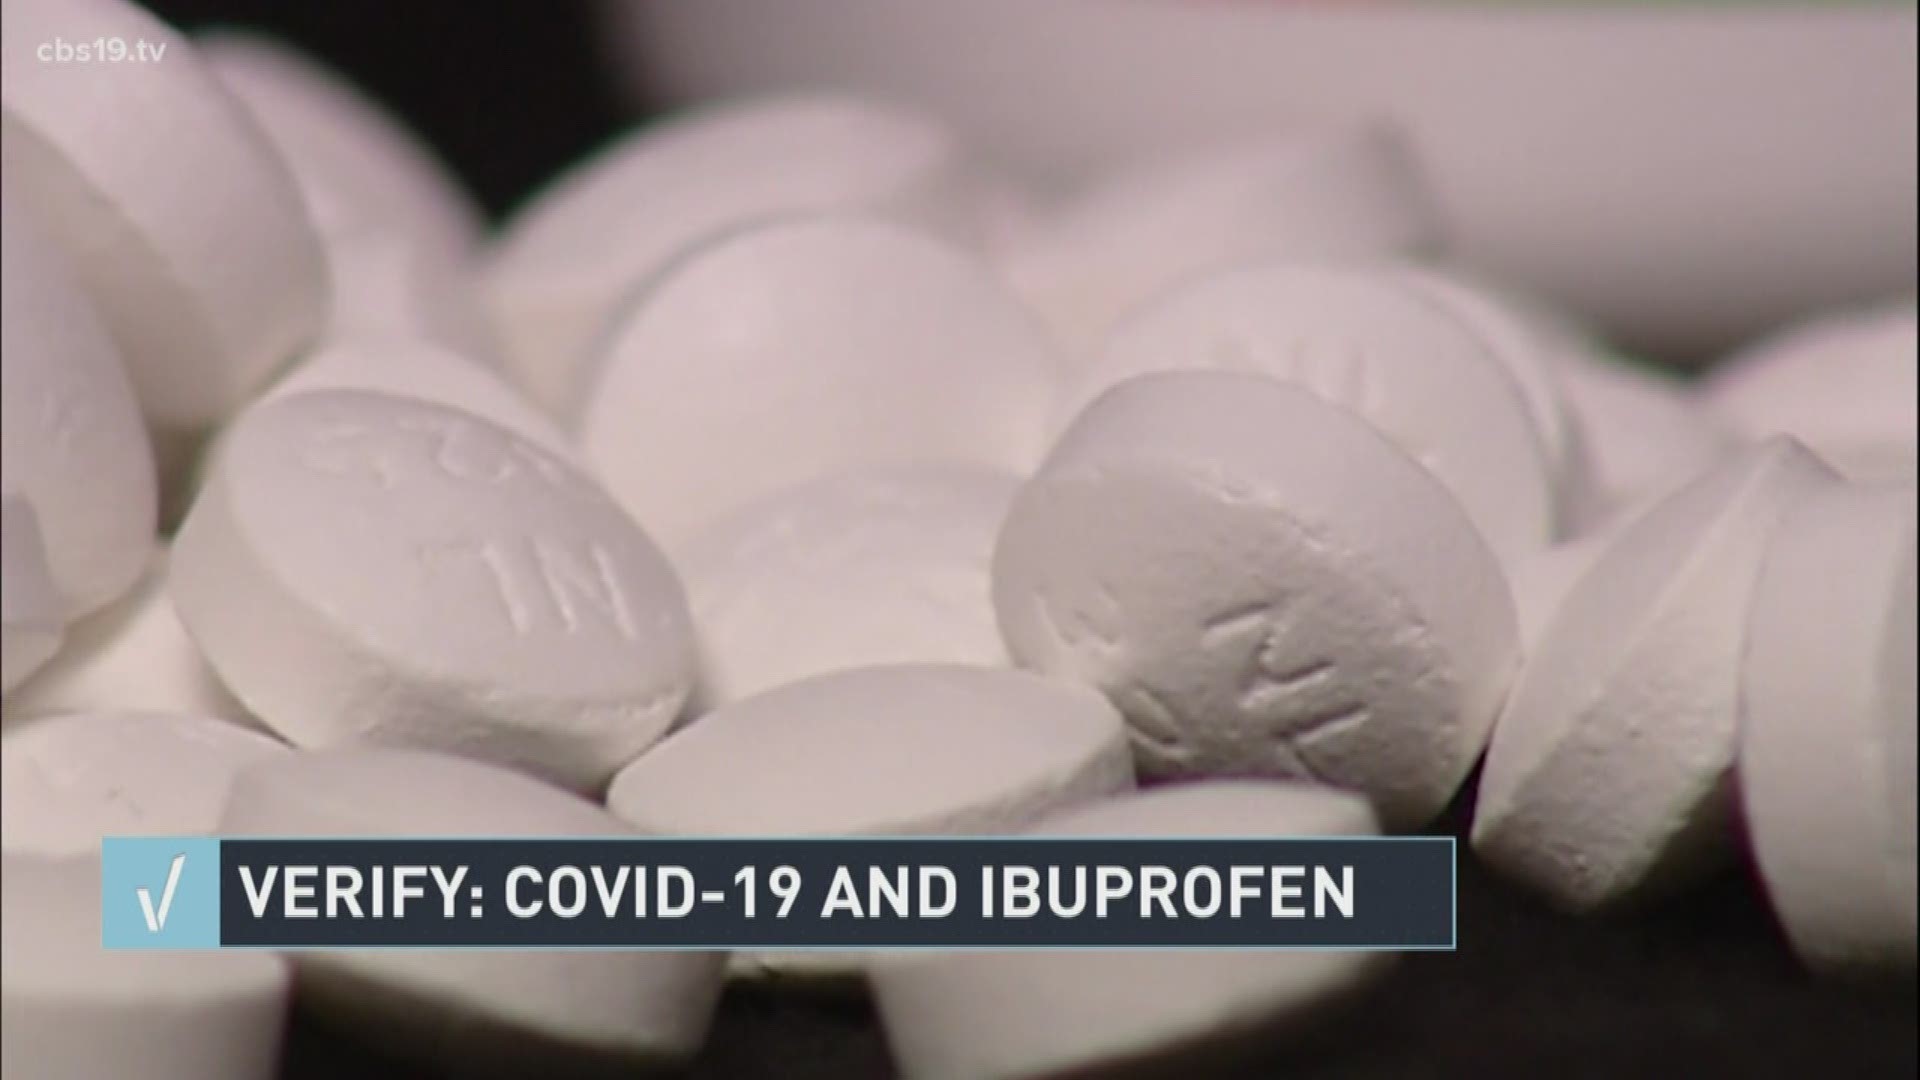 Some viewers have asked if Ibuprofen could intensify or prolong coronavirus symptoms. CBS19's David Lippman verifies whether the claims are true.